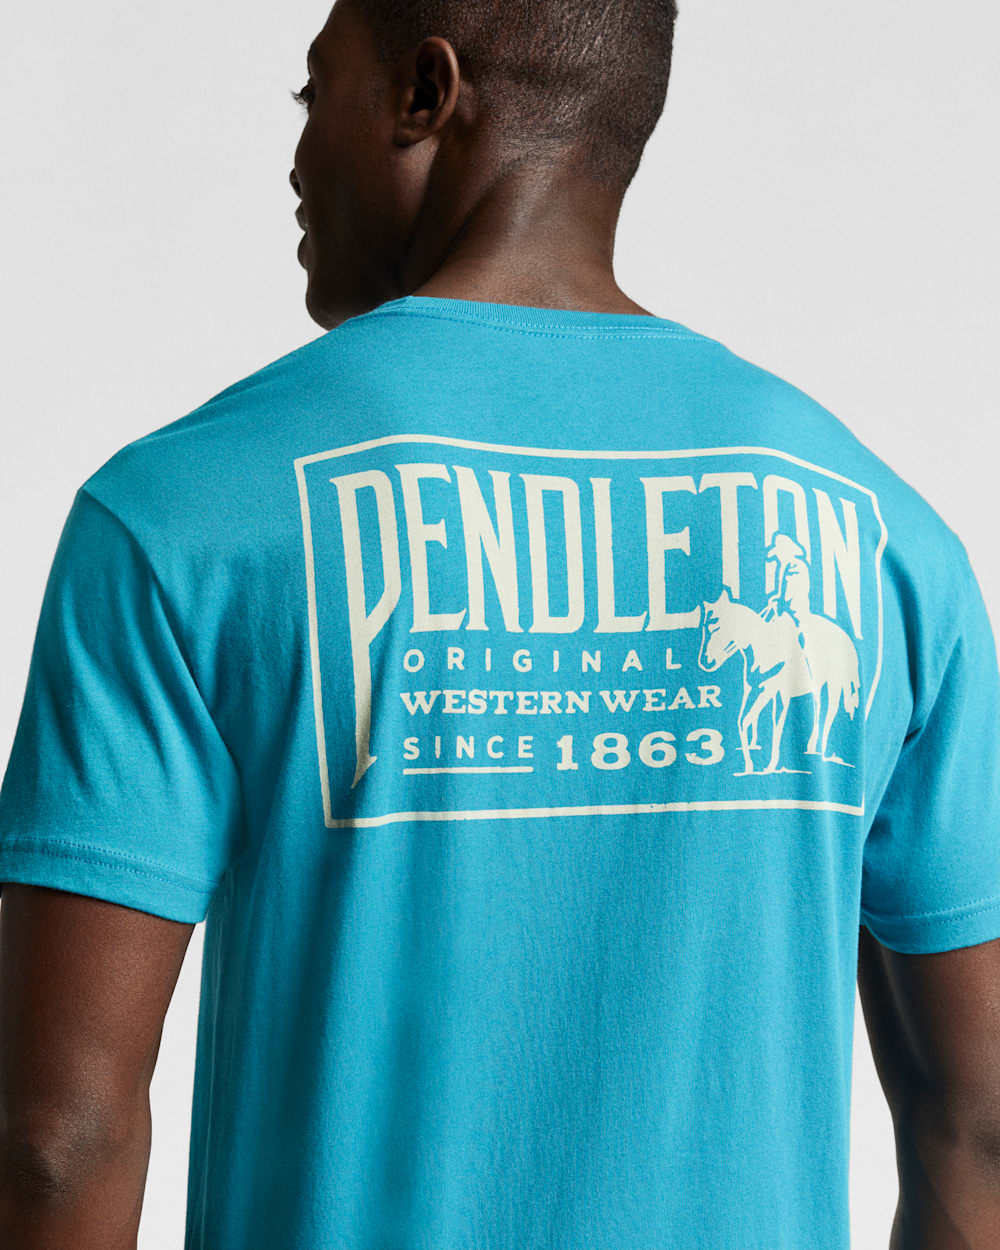 ALTERNATE VIEW OF MEN'S ORIGINAL WESTERN GRAPHIC TEE IN TEAL/WHITE image number 4